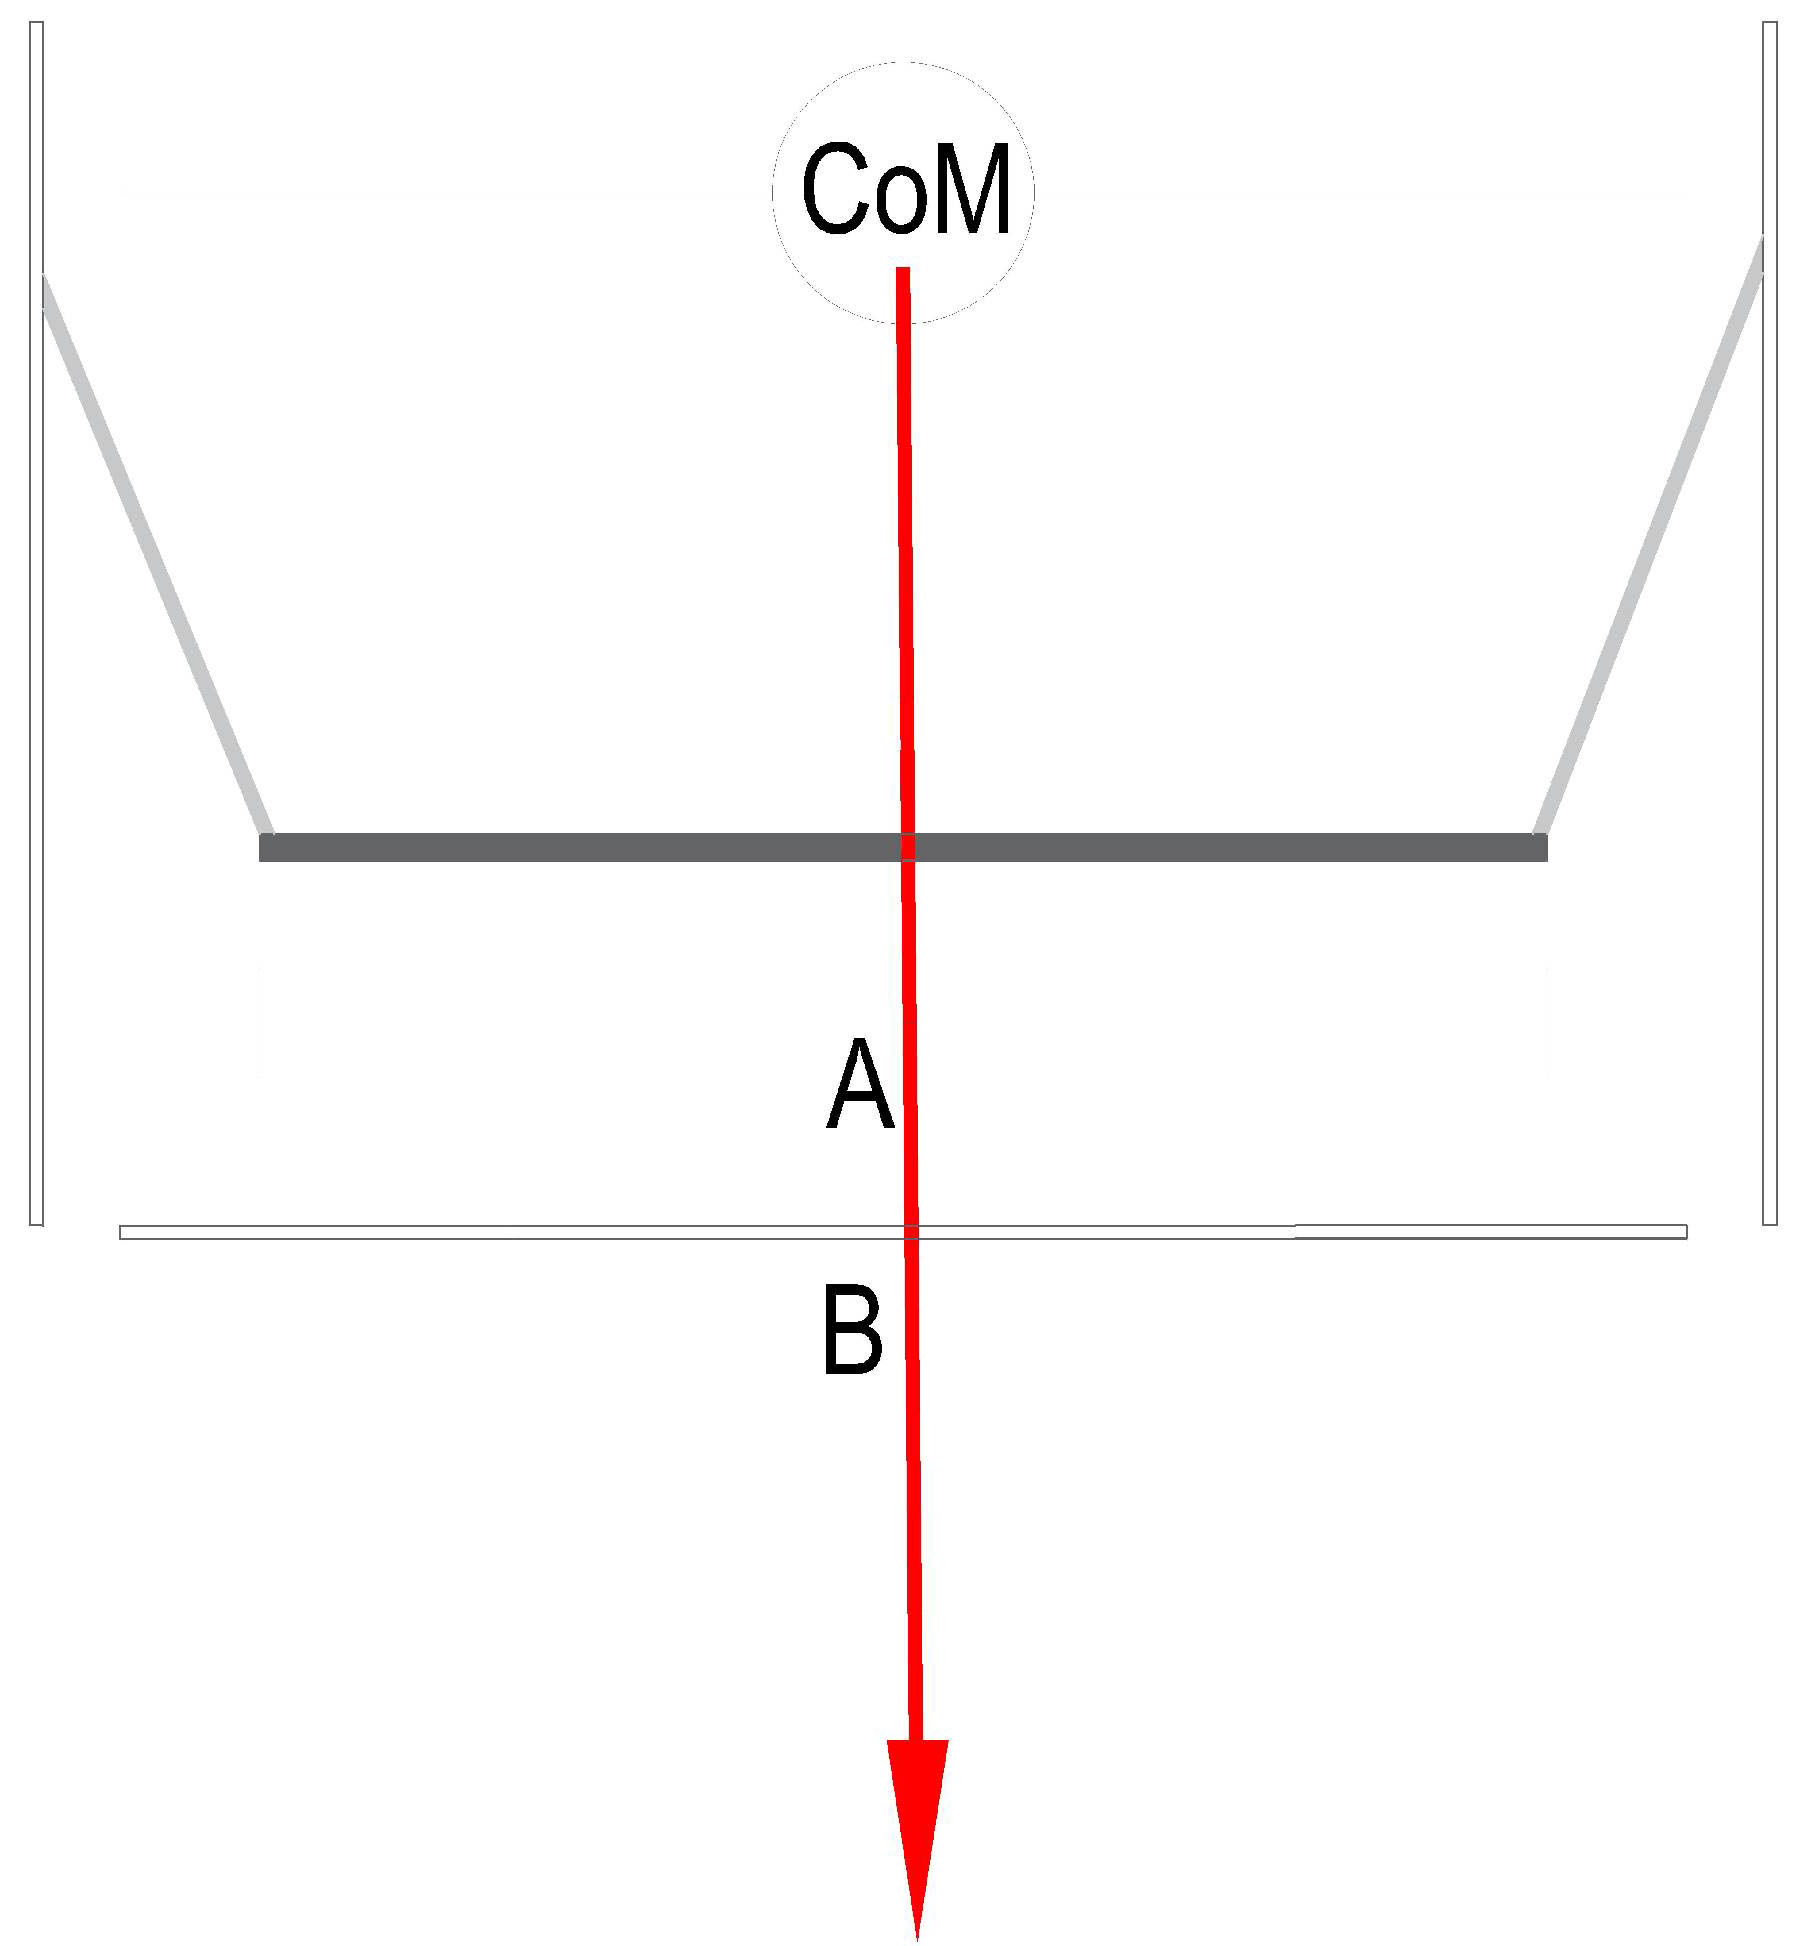 Neutral position when standing on a balance platform when COM coincides with BOS.